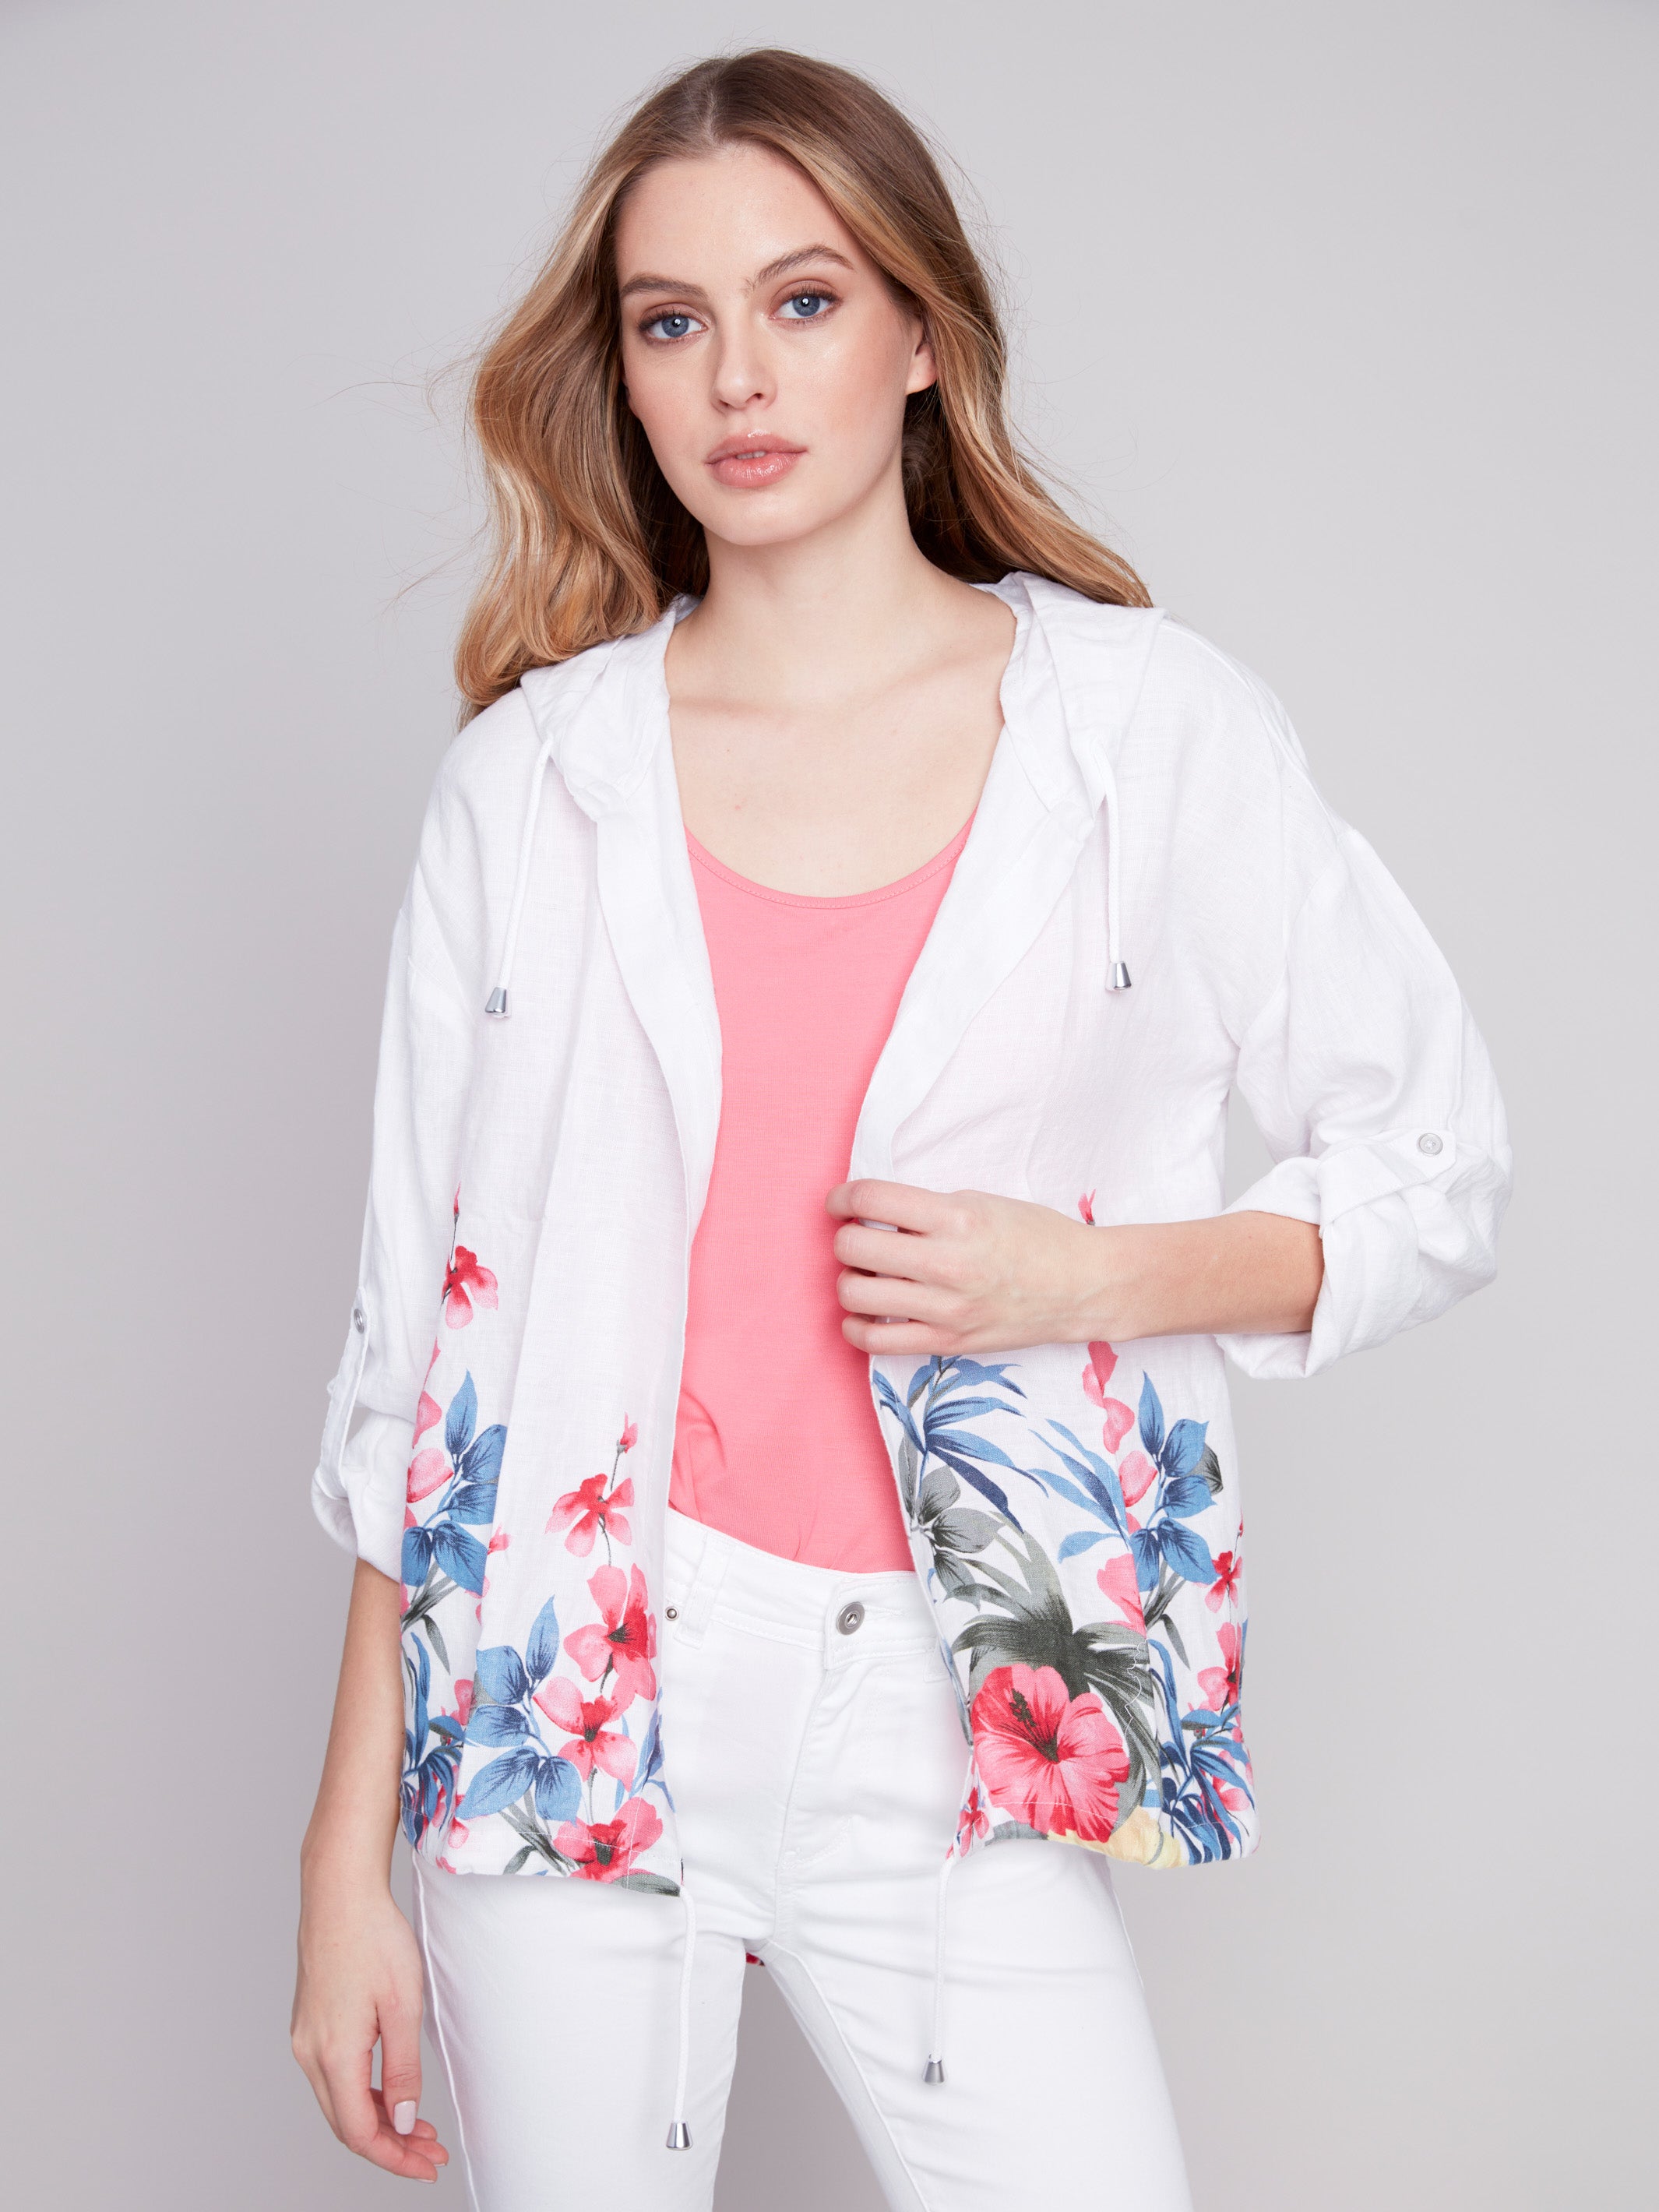 Charlie B Collection - Women's Jackets & Vests